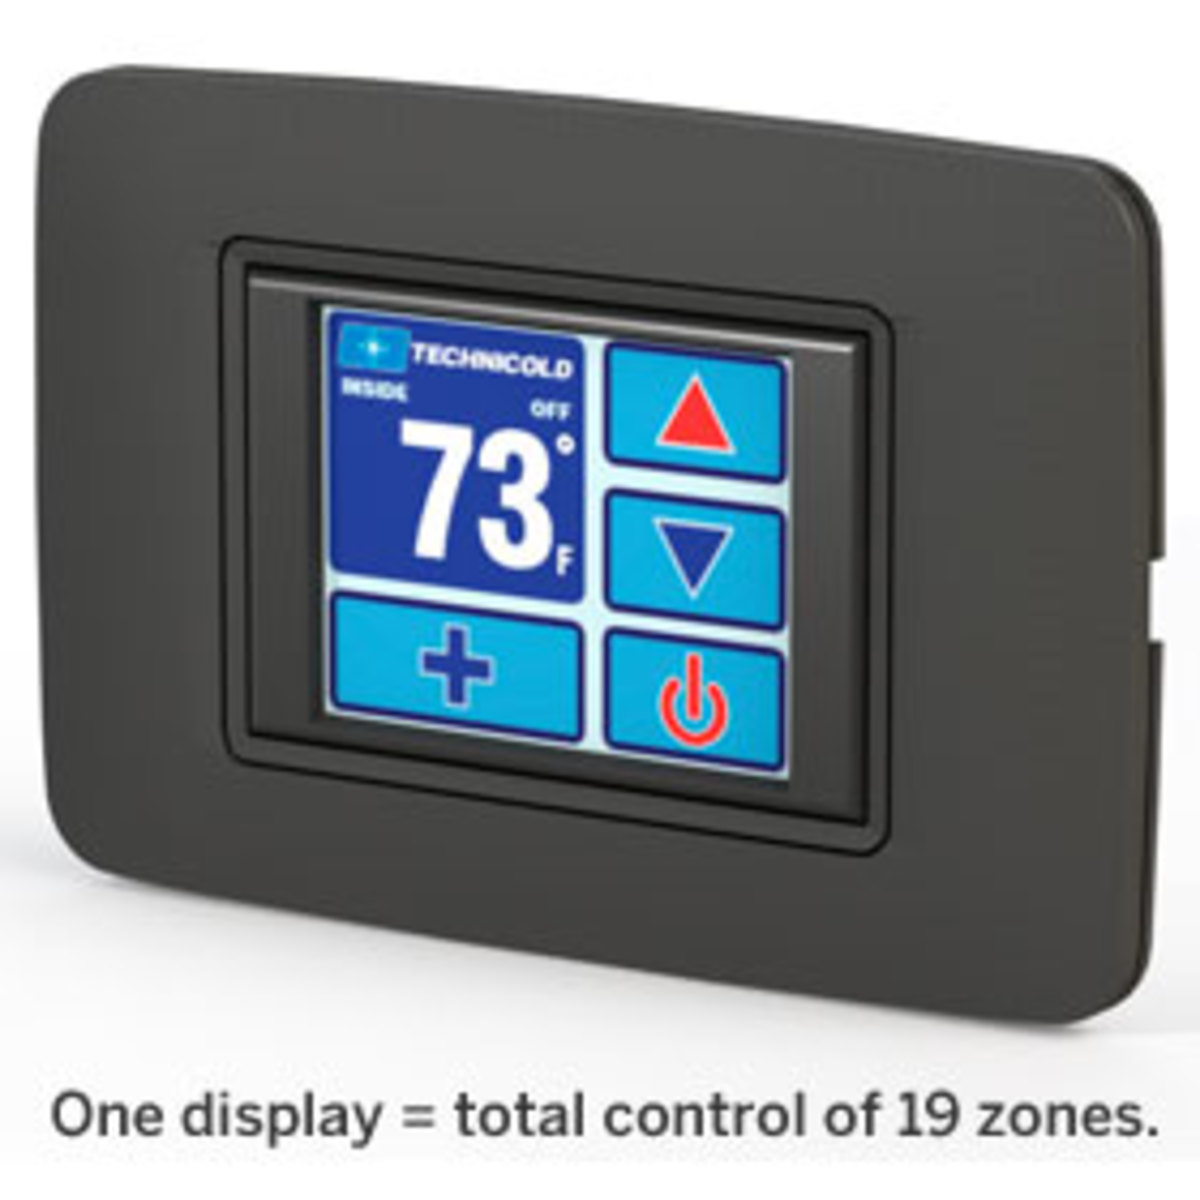 One display = total control of 19 zones.